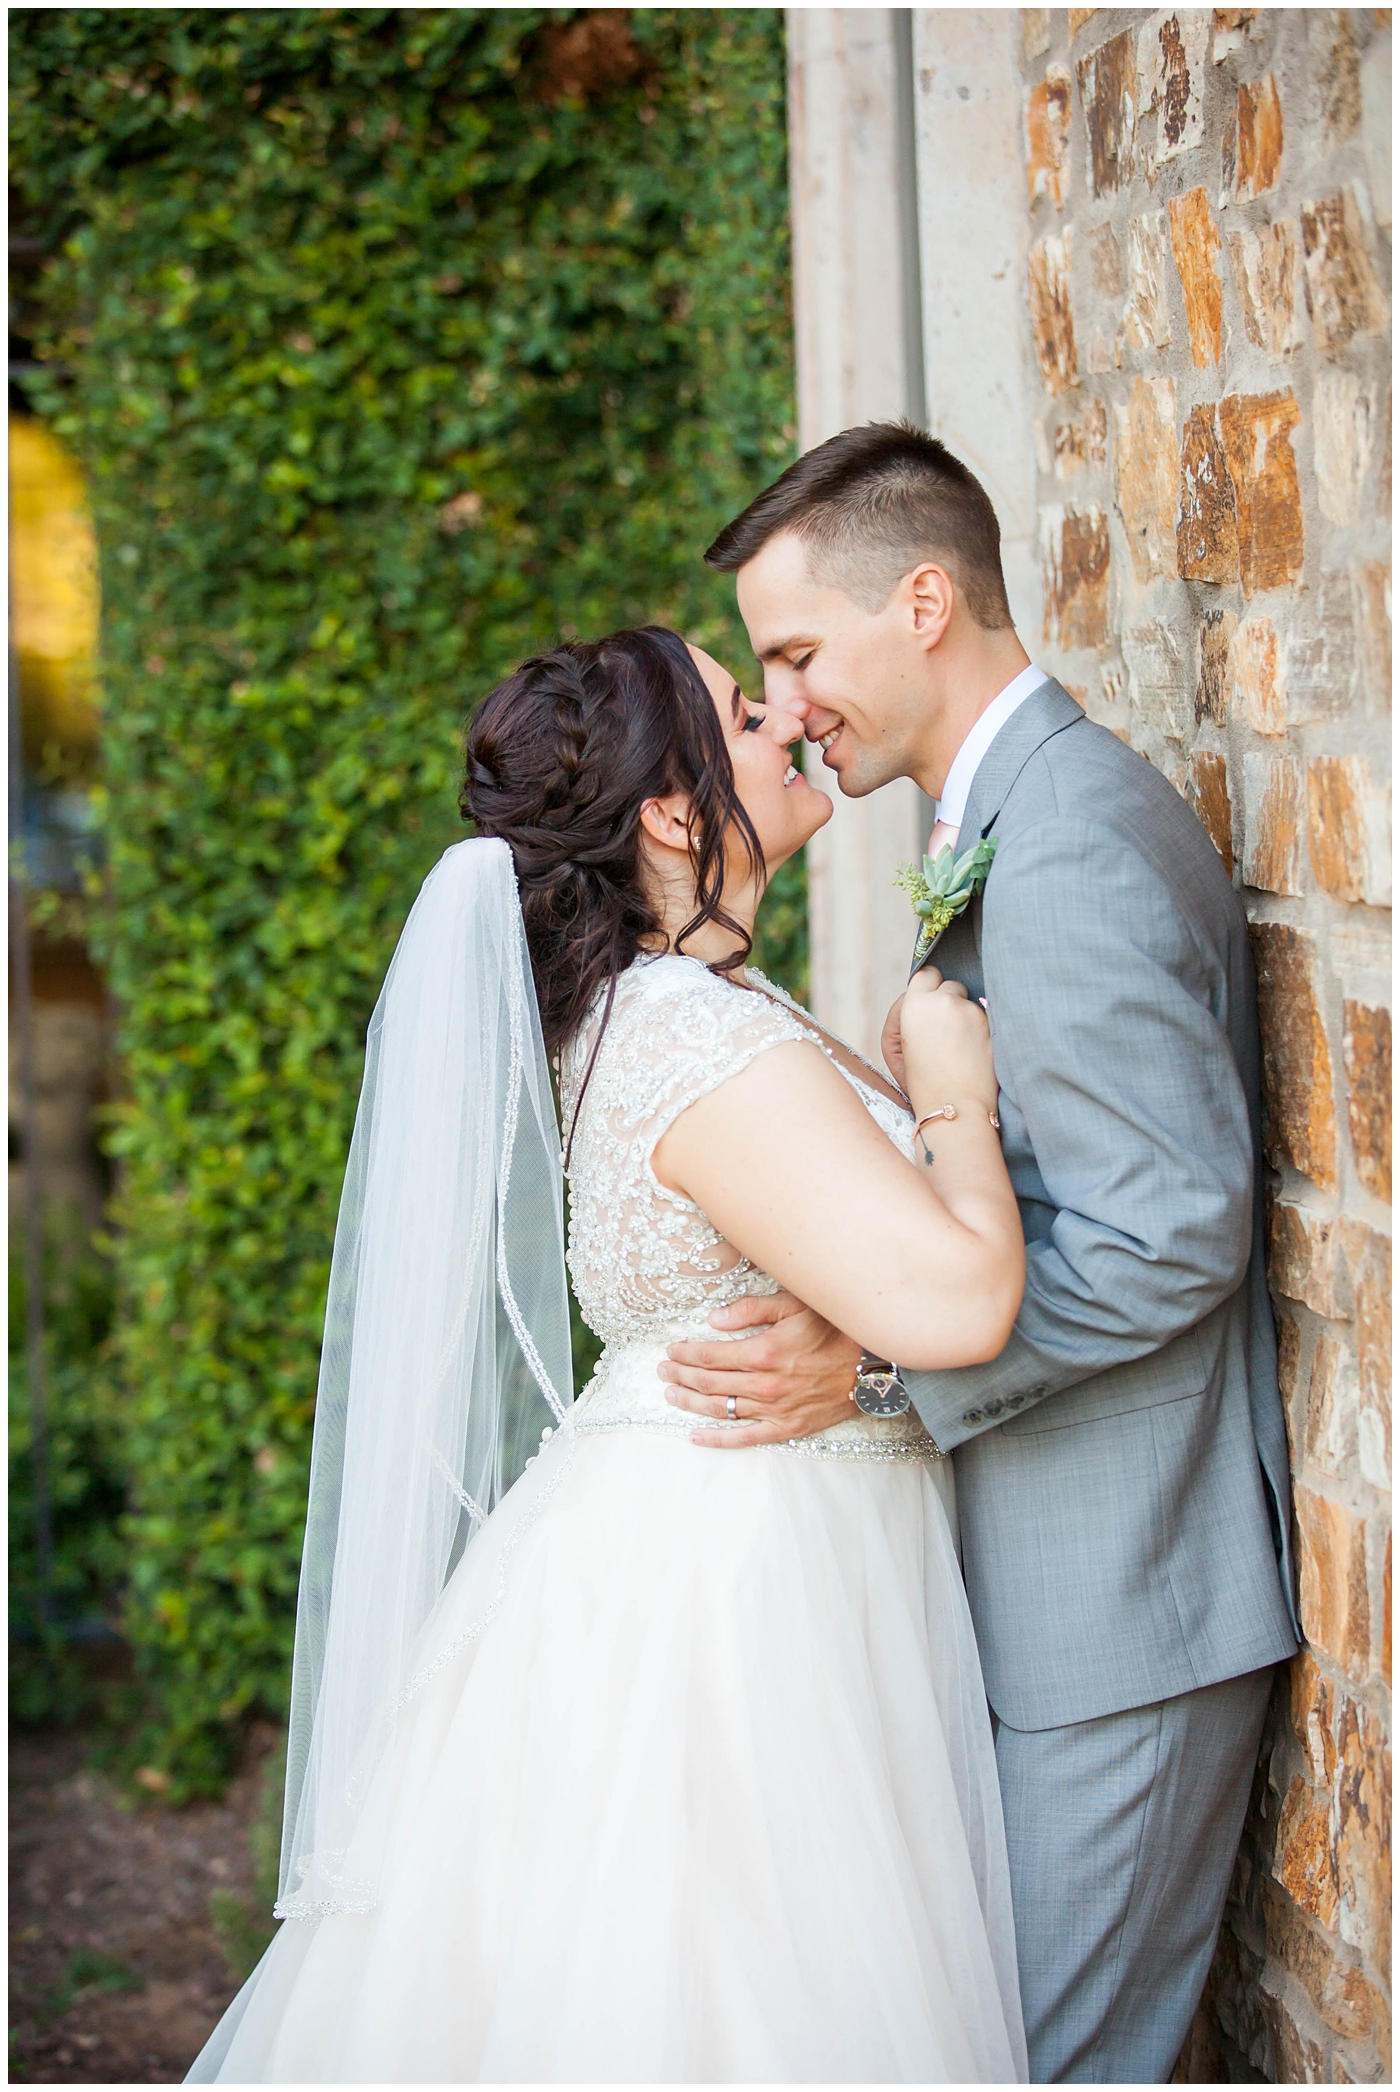 Bride in sleeved white dress and groom in gray jacket kissing